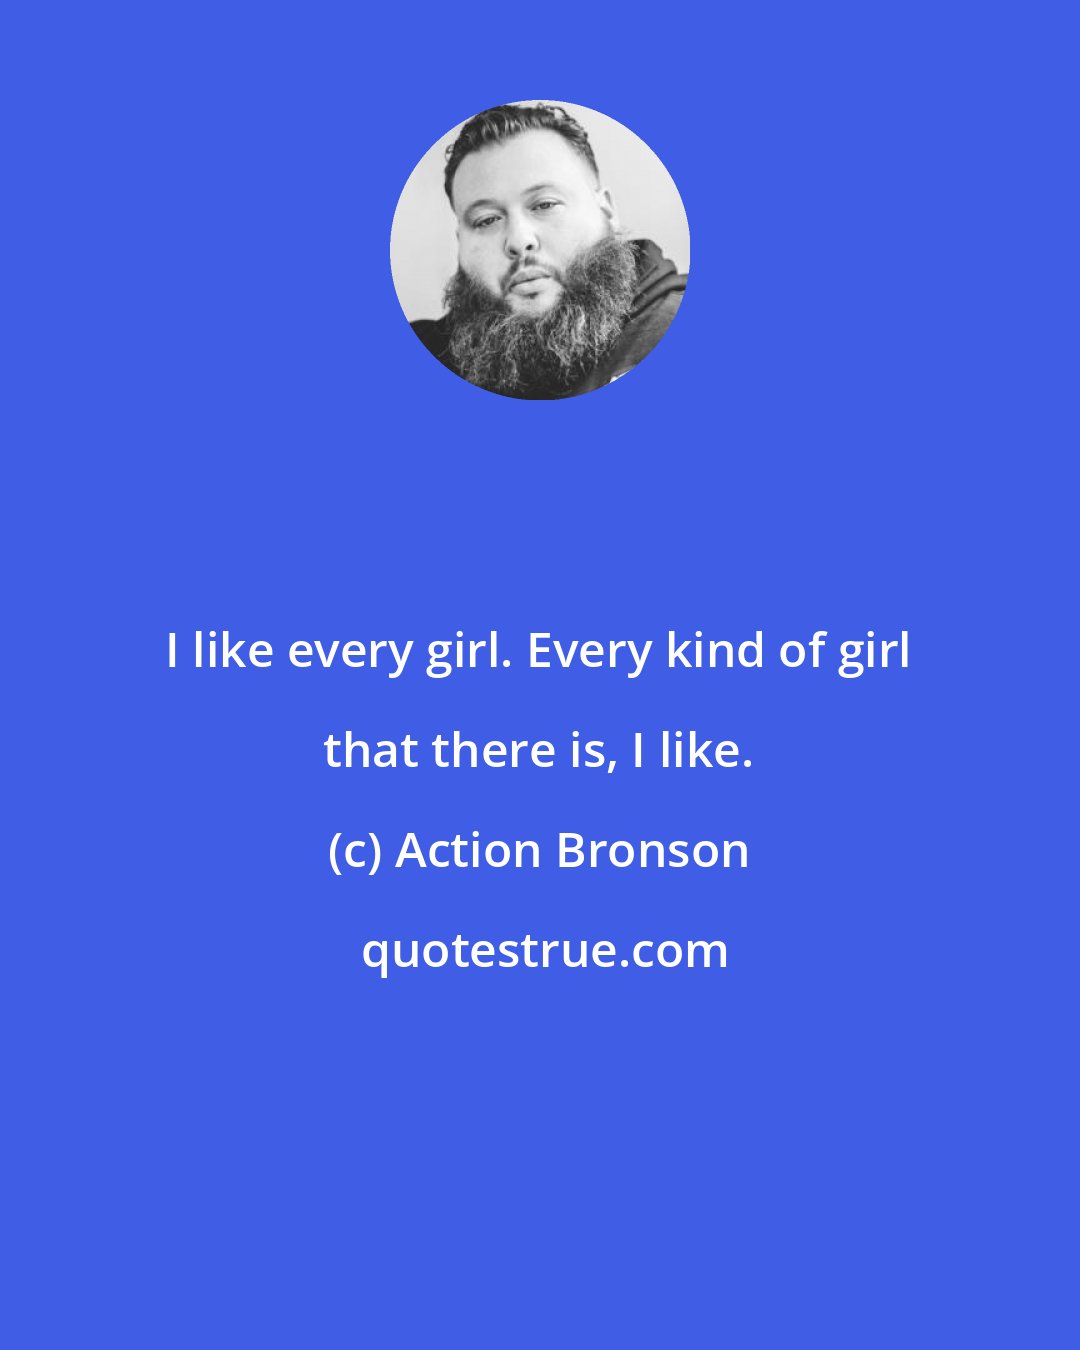 Action Bronson: I like every girl. Every kind of girl that there is, I like.